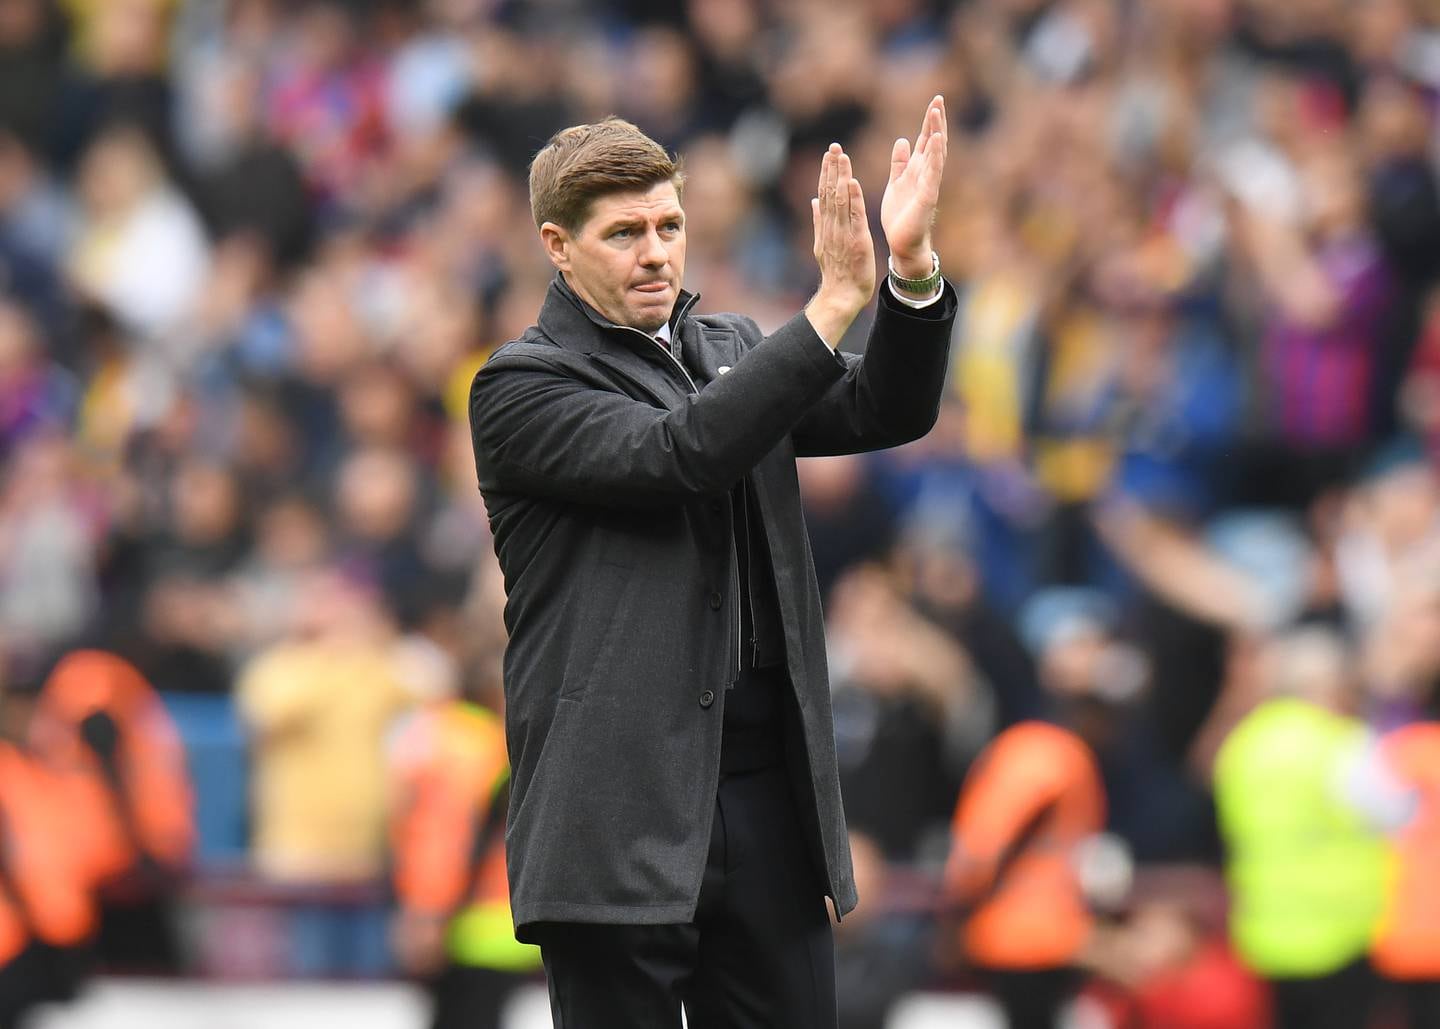 Aston Villa manager Steven Gerrard can still help decide the top and bottom of the Premier League. Getty